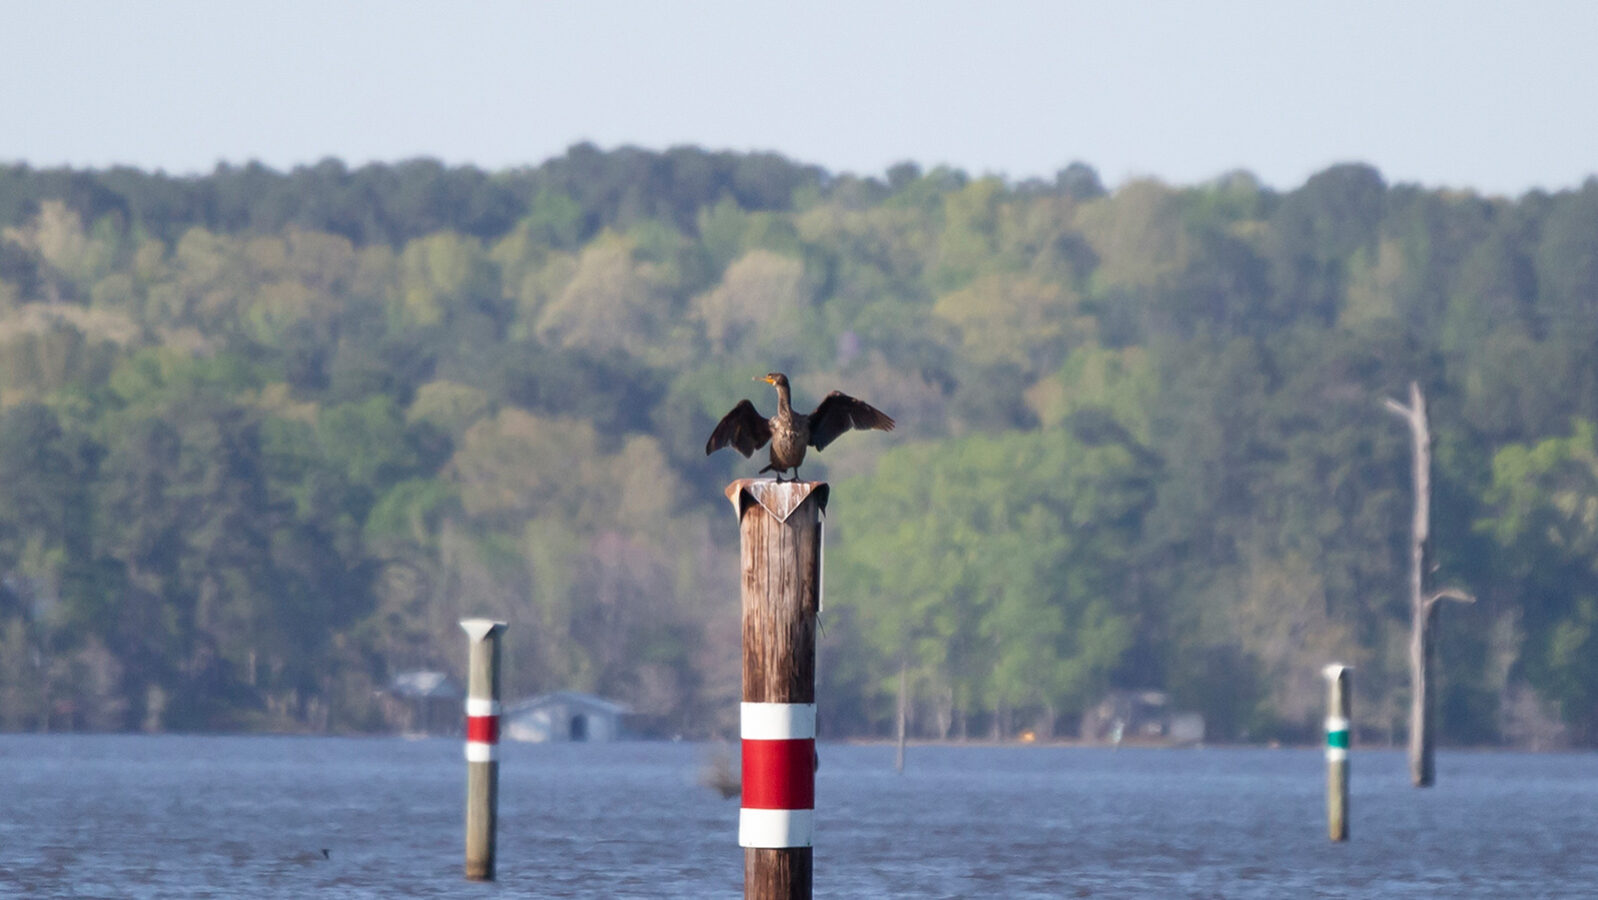 Double-crested cormorant standing on a wooden pole spreading its wings